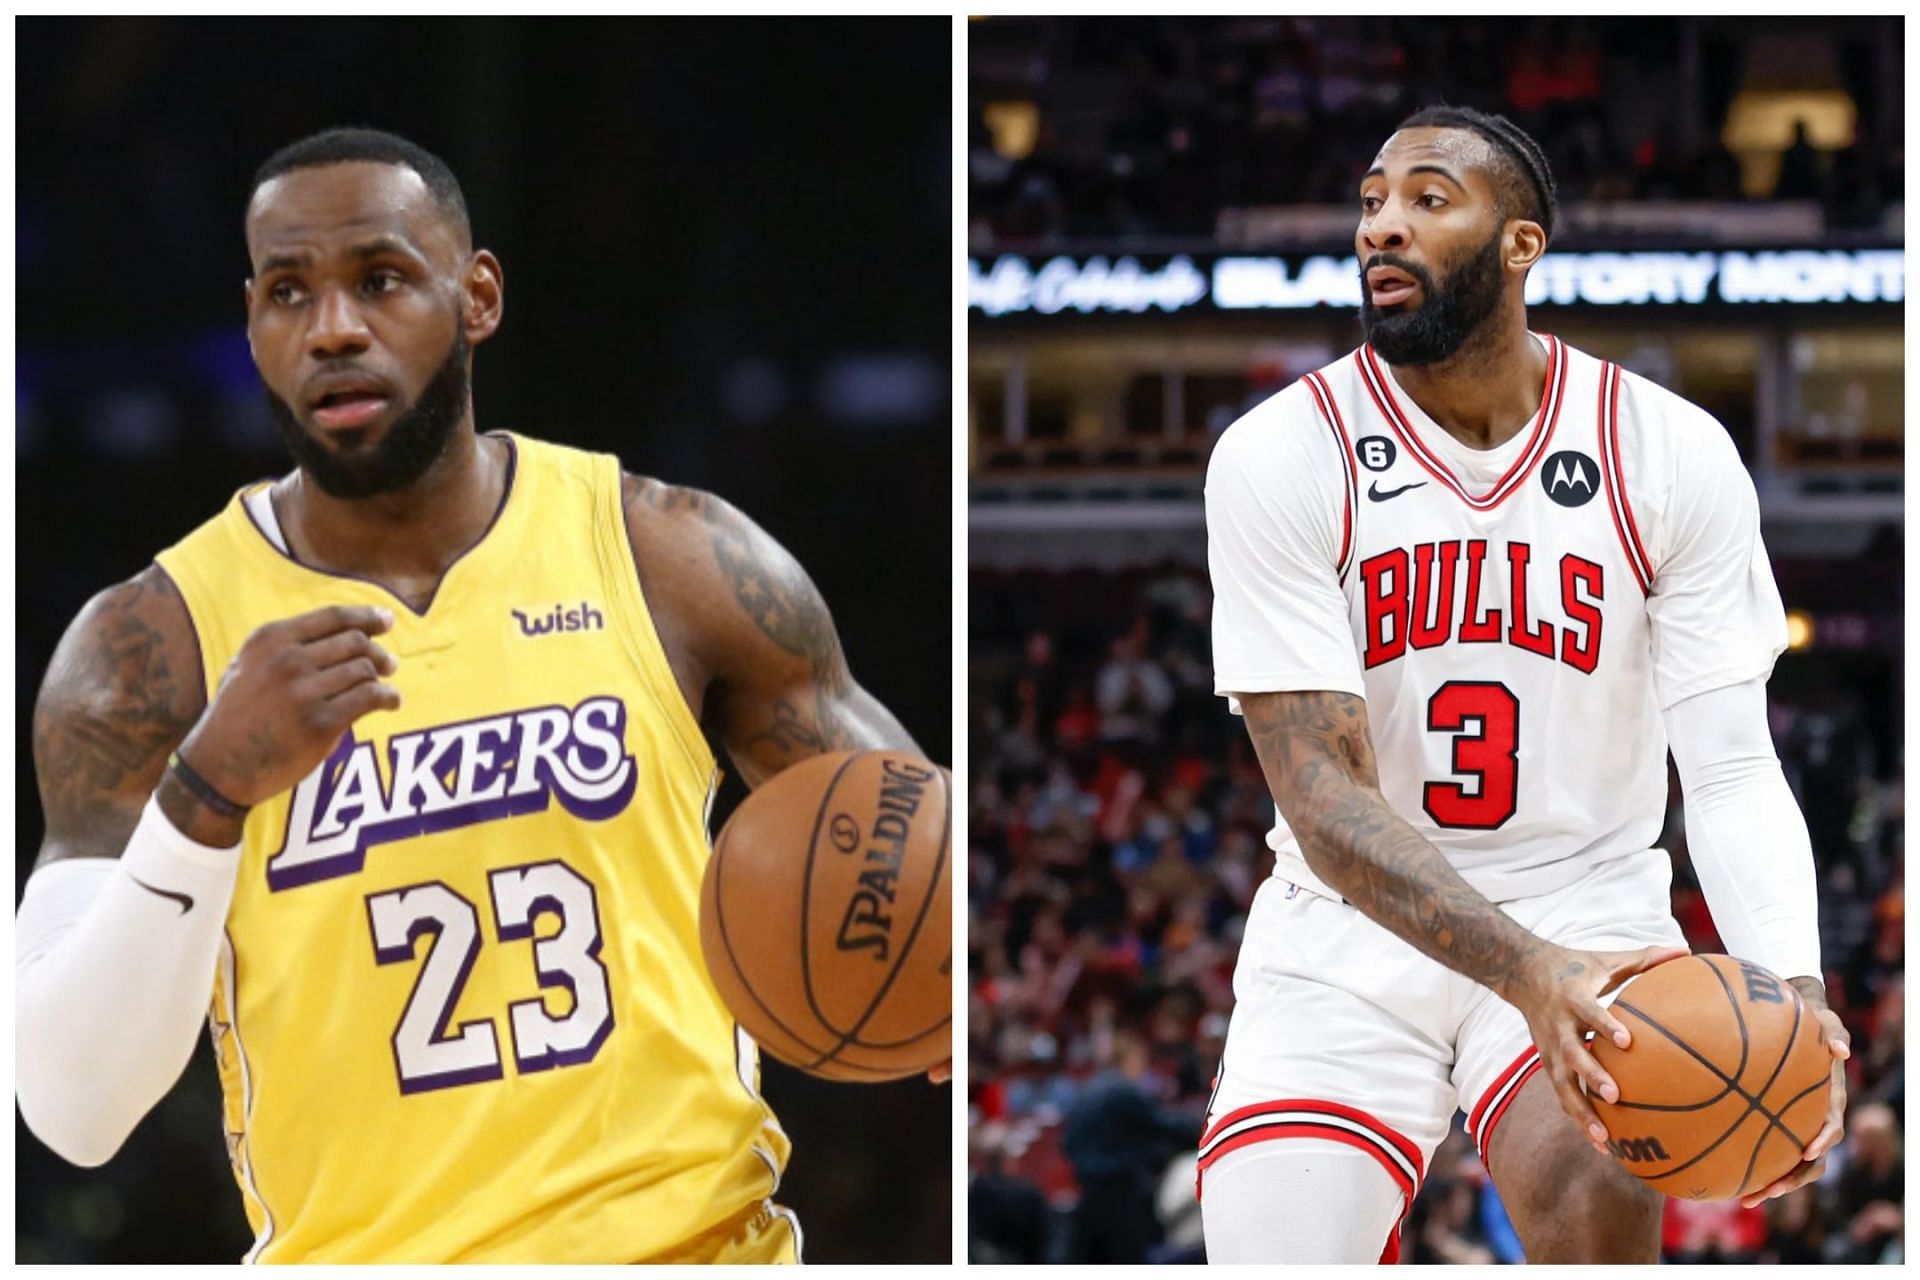 LeBron James (left) and Andre Drummond (right) are on top o the list with the active NBA players with the most rebounds in league history